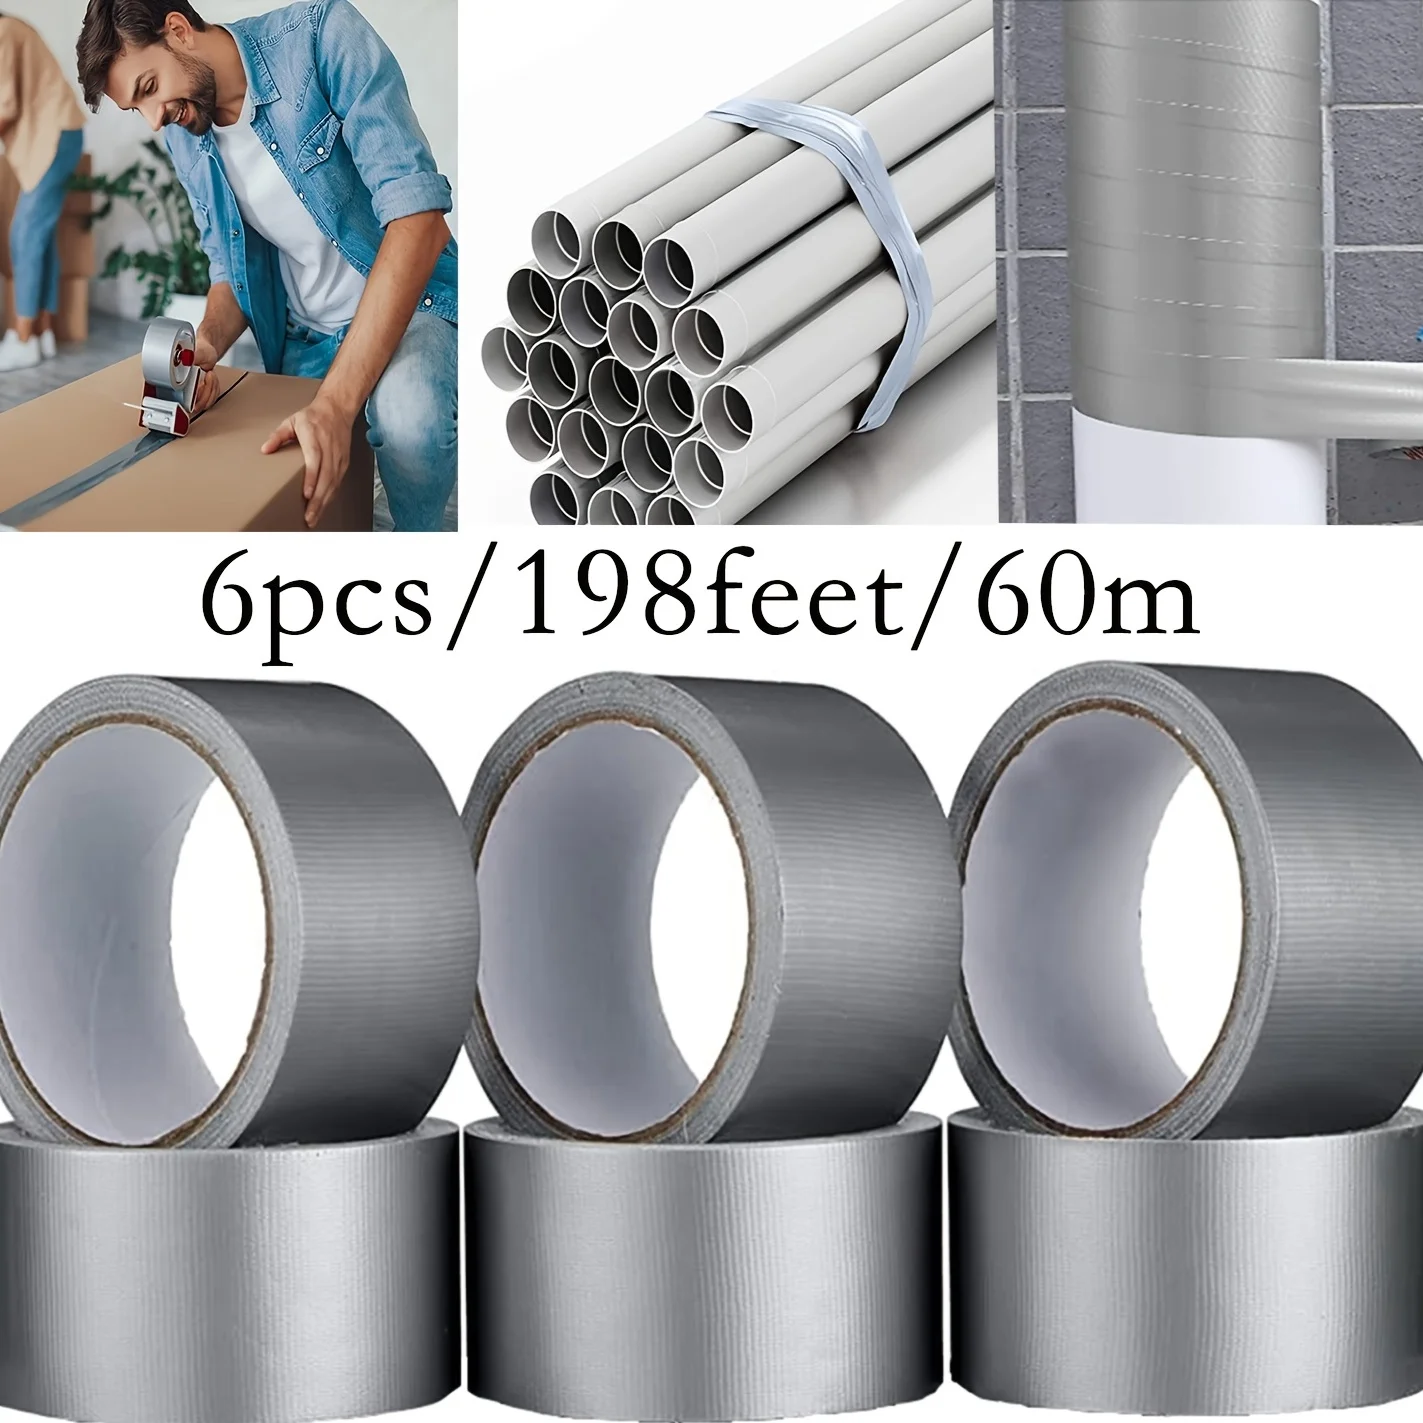 Heavy Duty Silver Duct Tape 30 Yards x Inch Strong Flexible No  Residue All-Weather and Tear by Hand Bulk Value for Do-It AliExpress